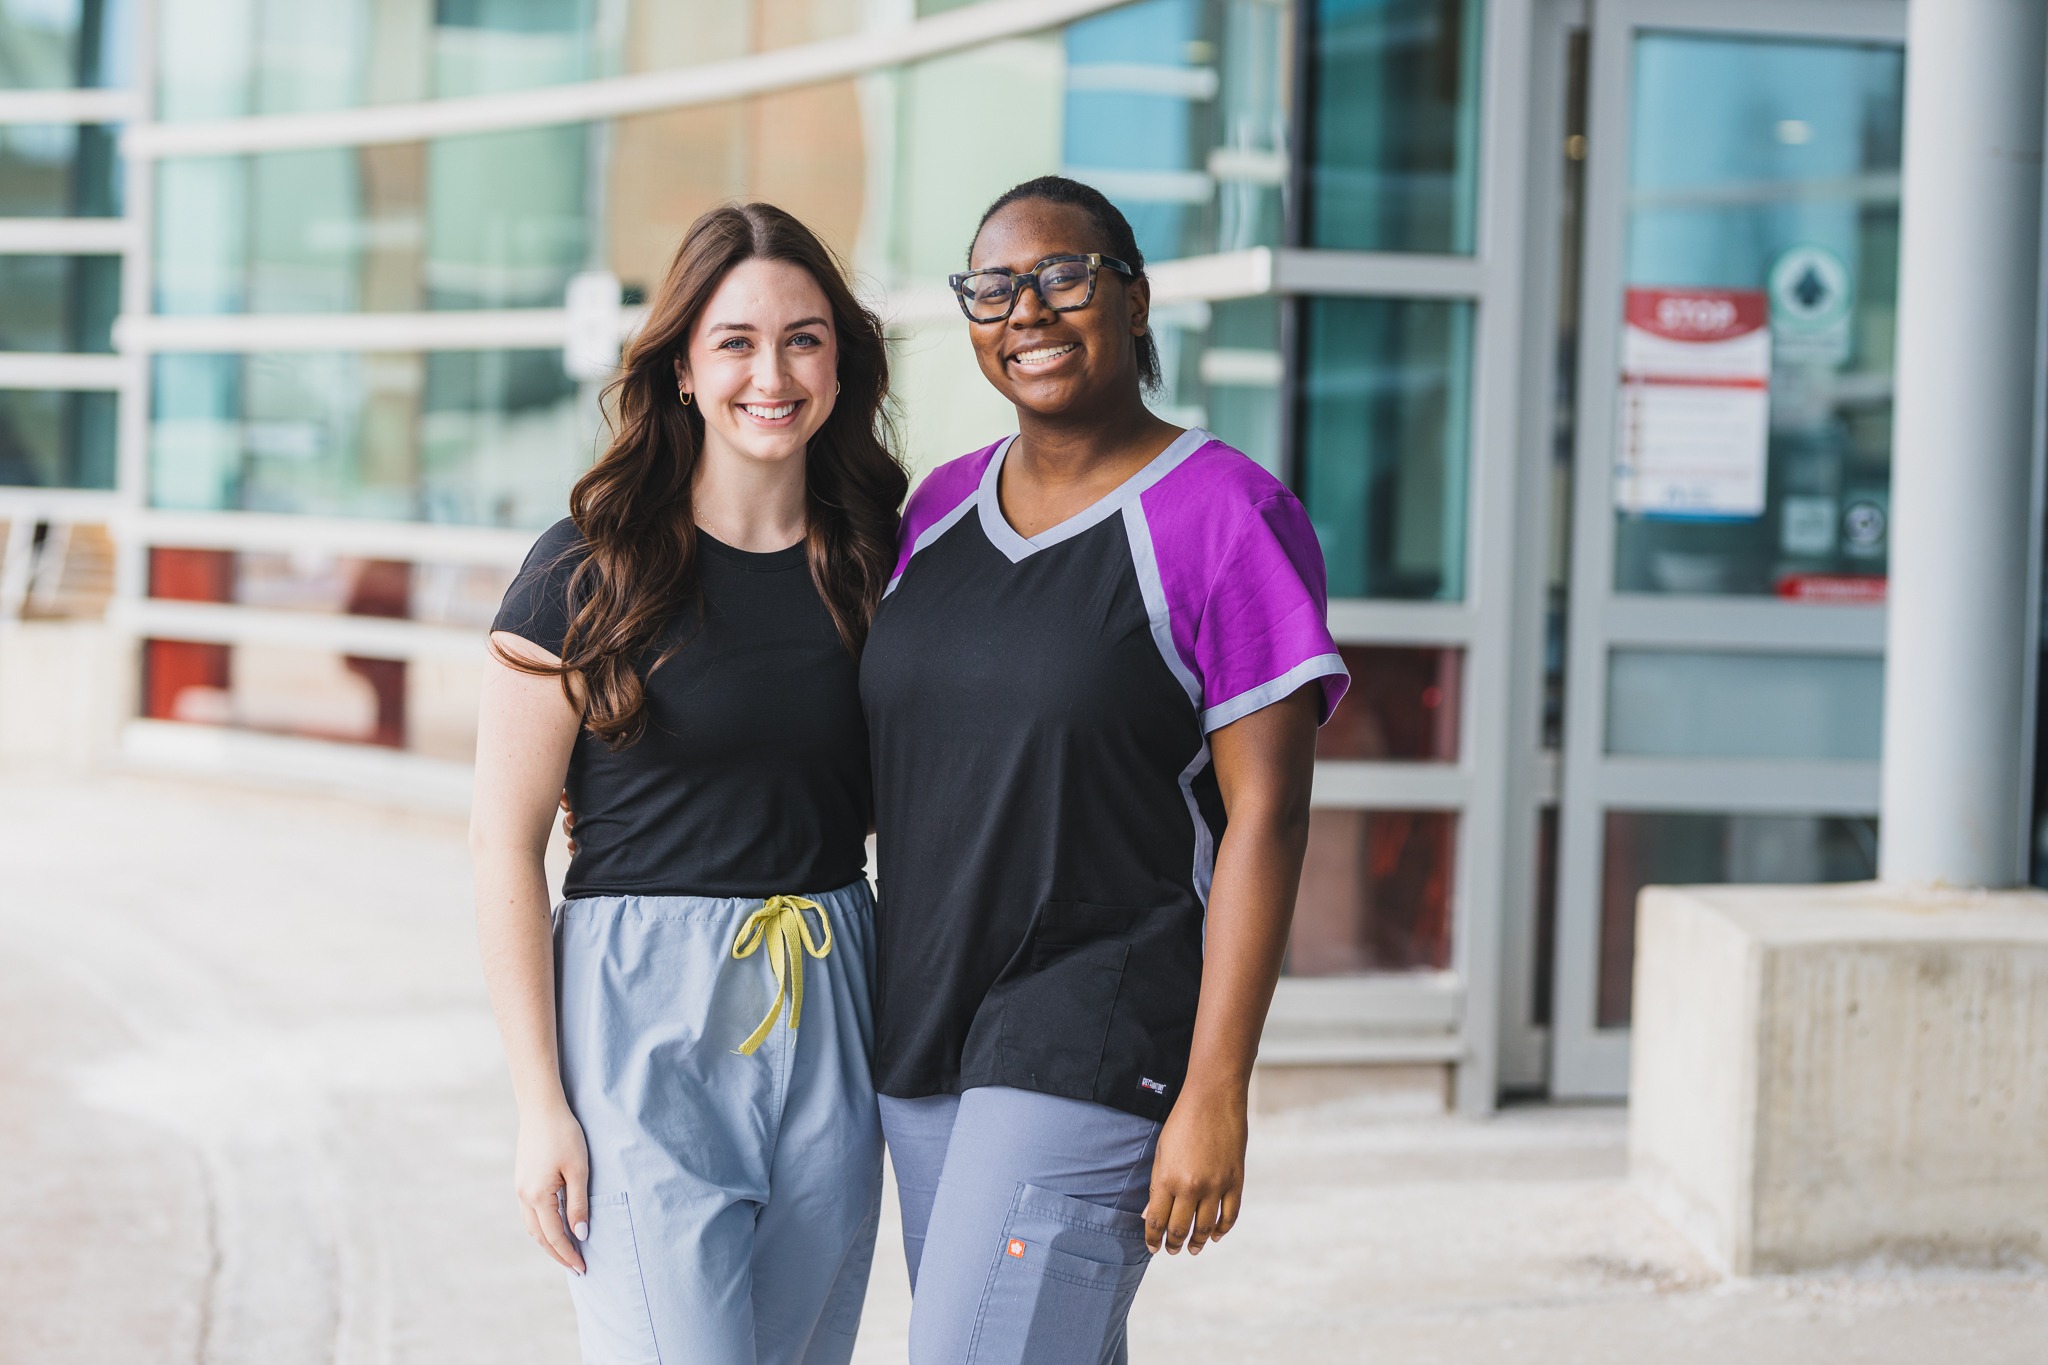 Nursing students Myiah Sloss and Taejah Roberts are working as clinical externs at our Juravinski Hospital and Cancer Centre.